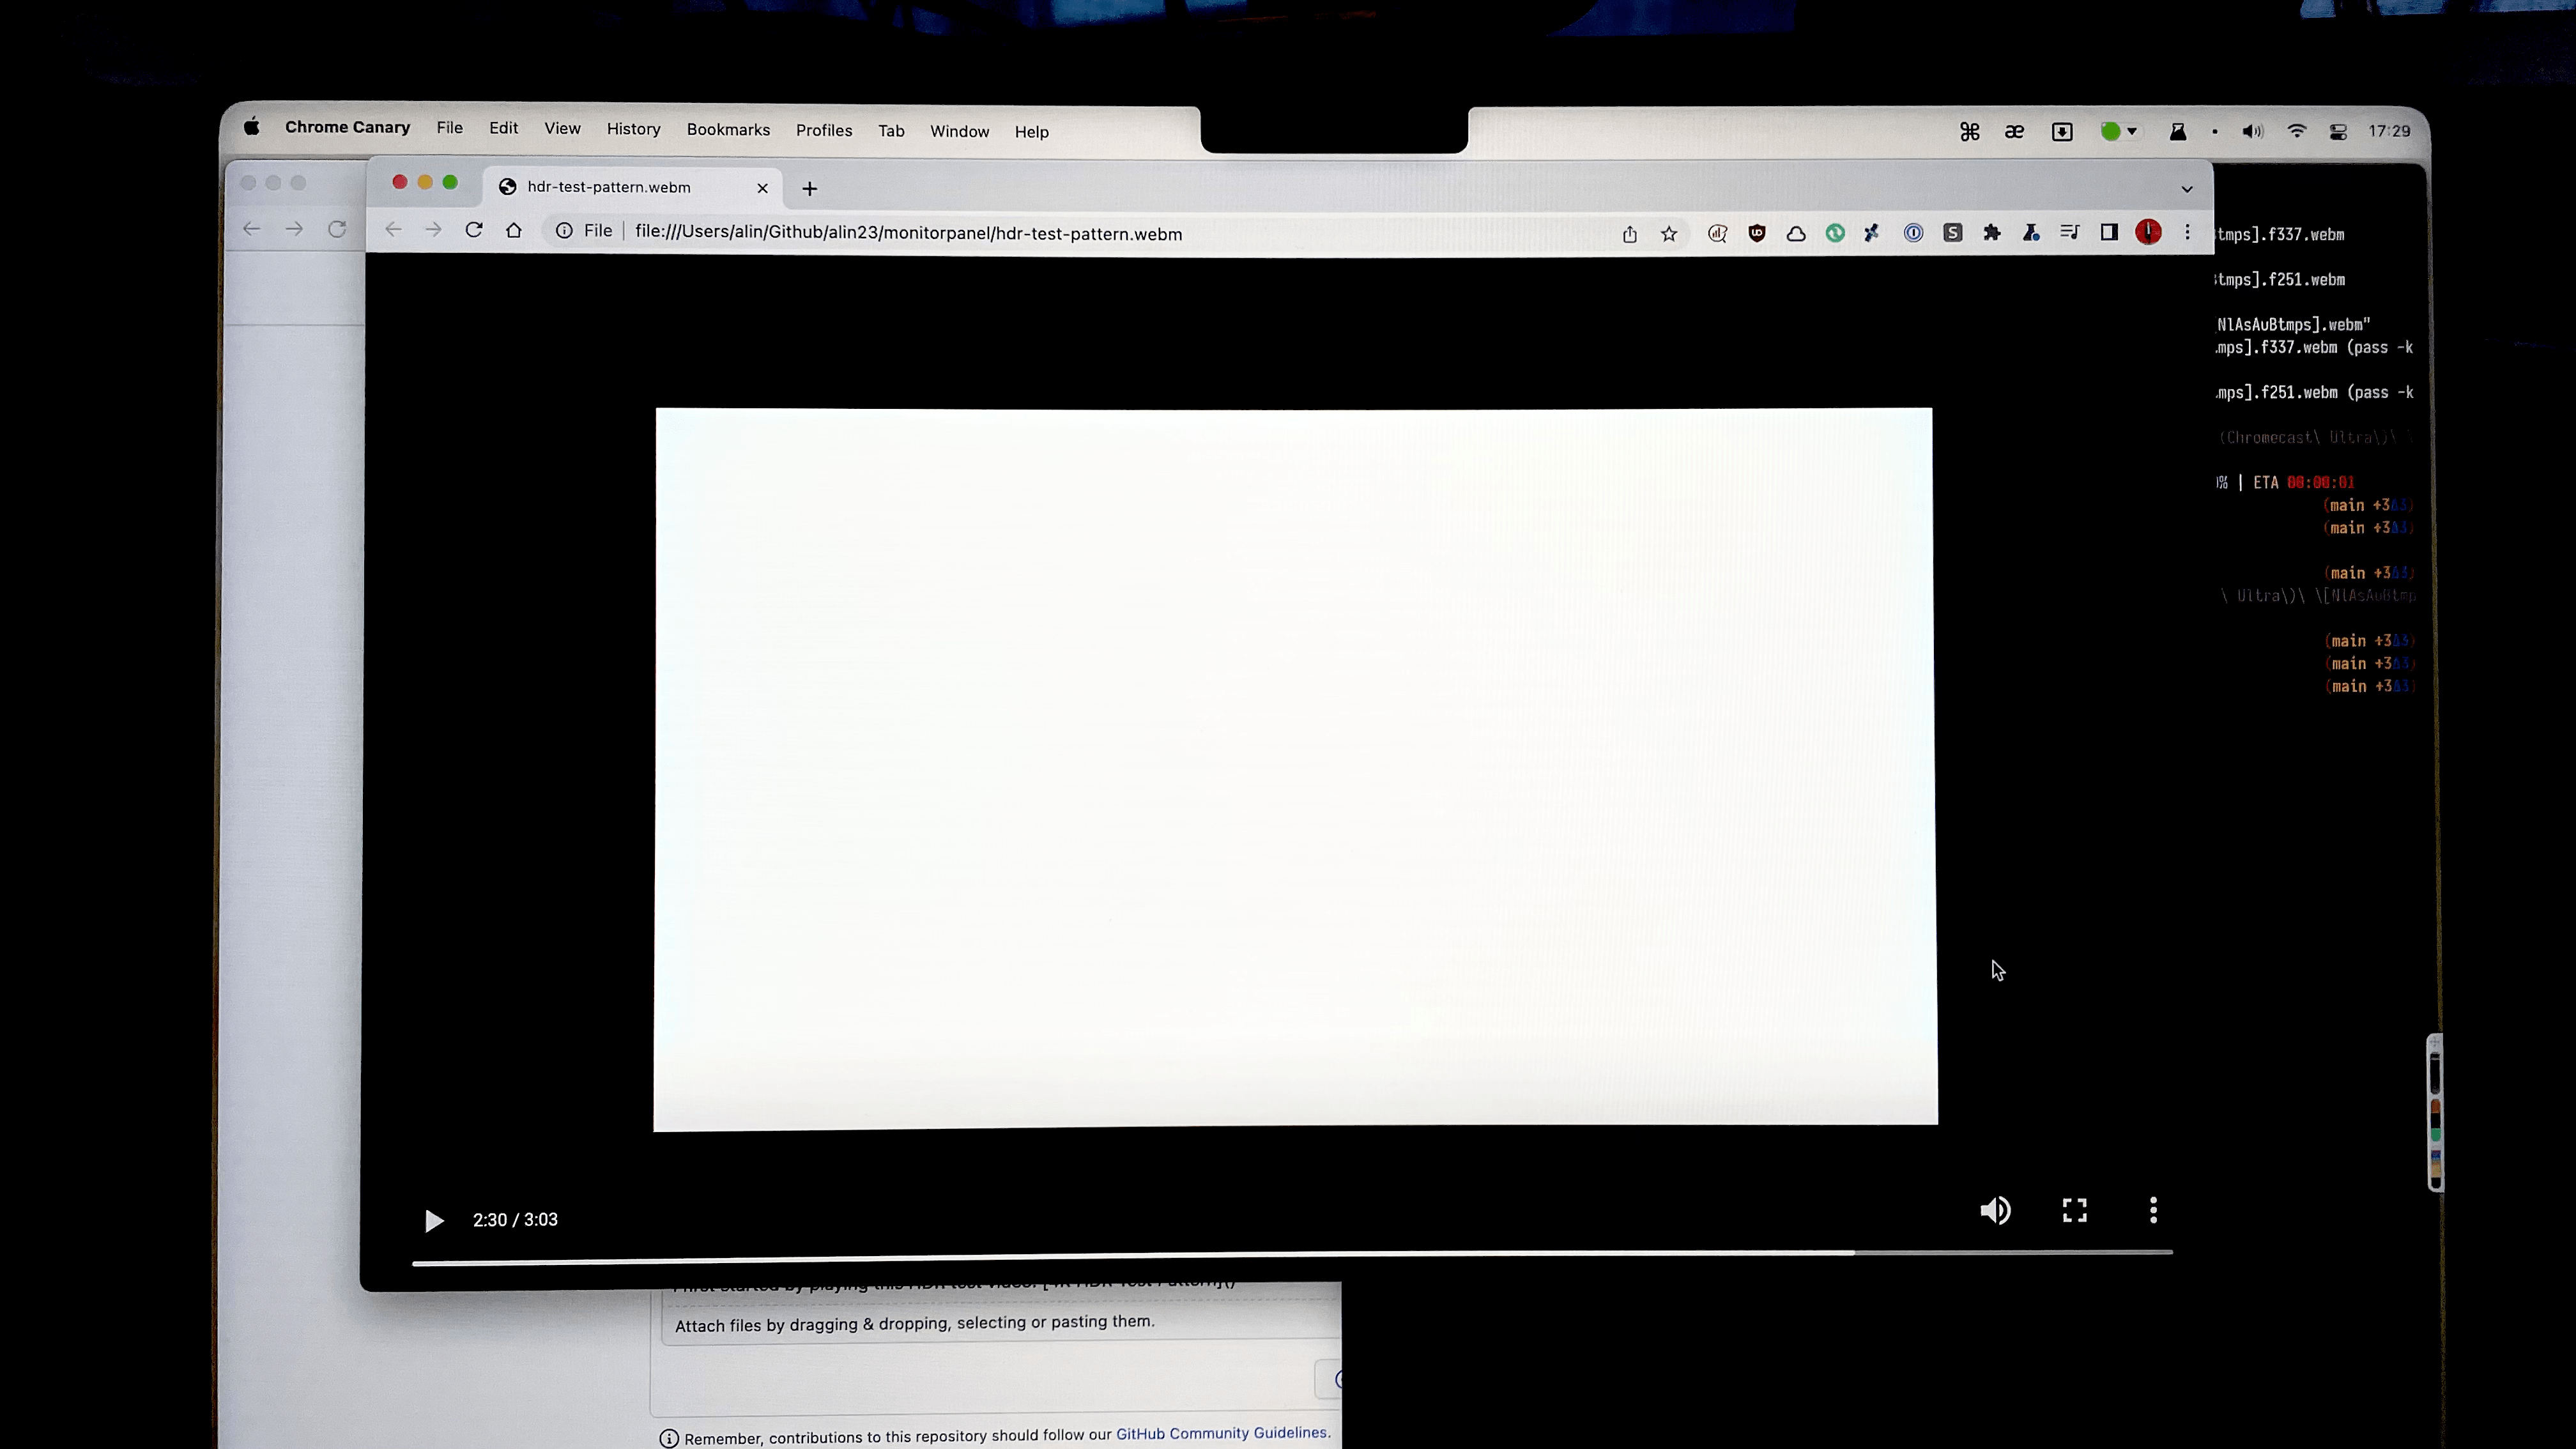 HDR white being whiter than the webpage white